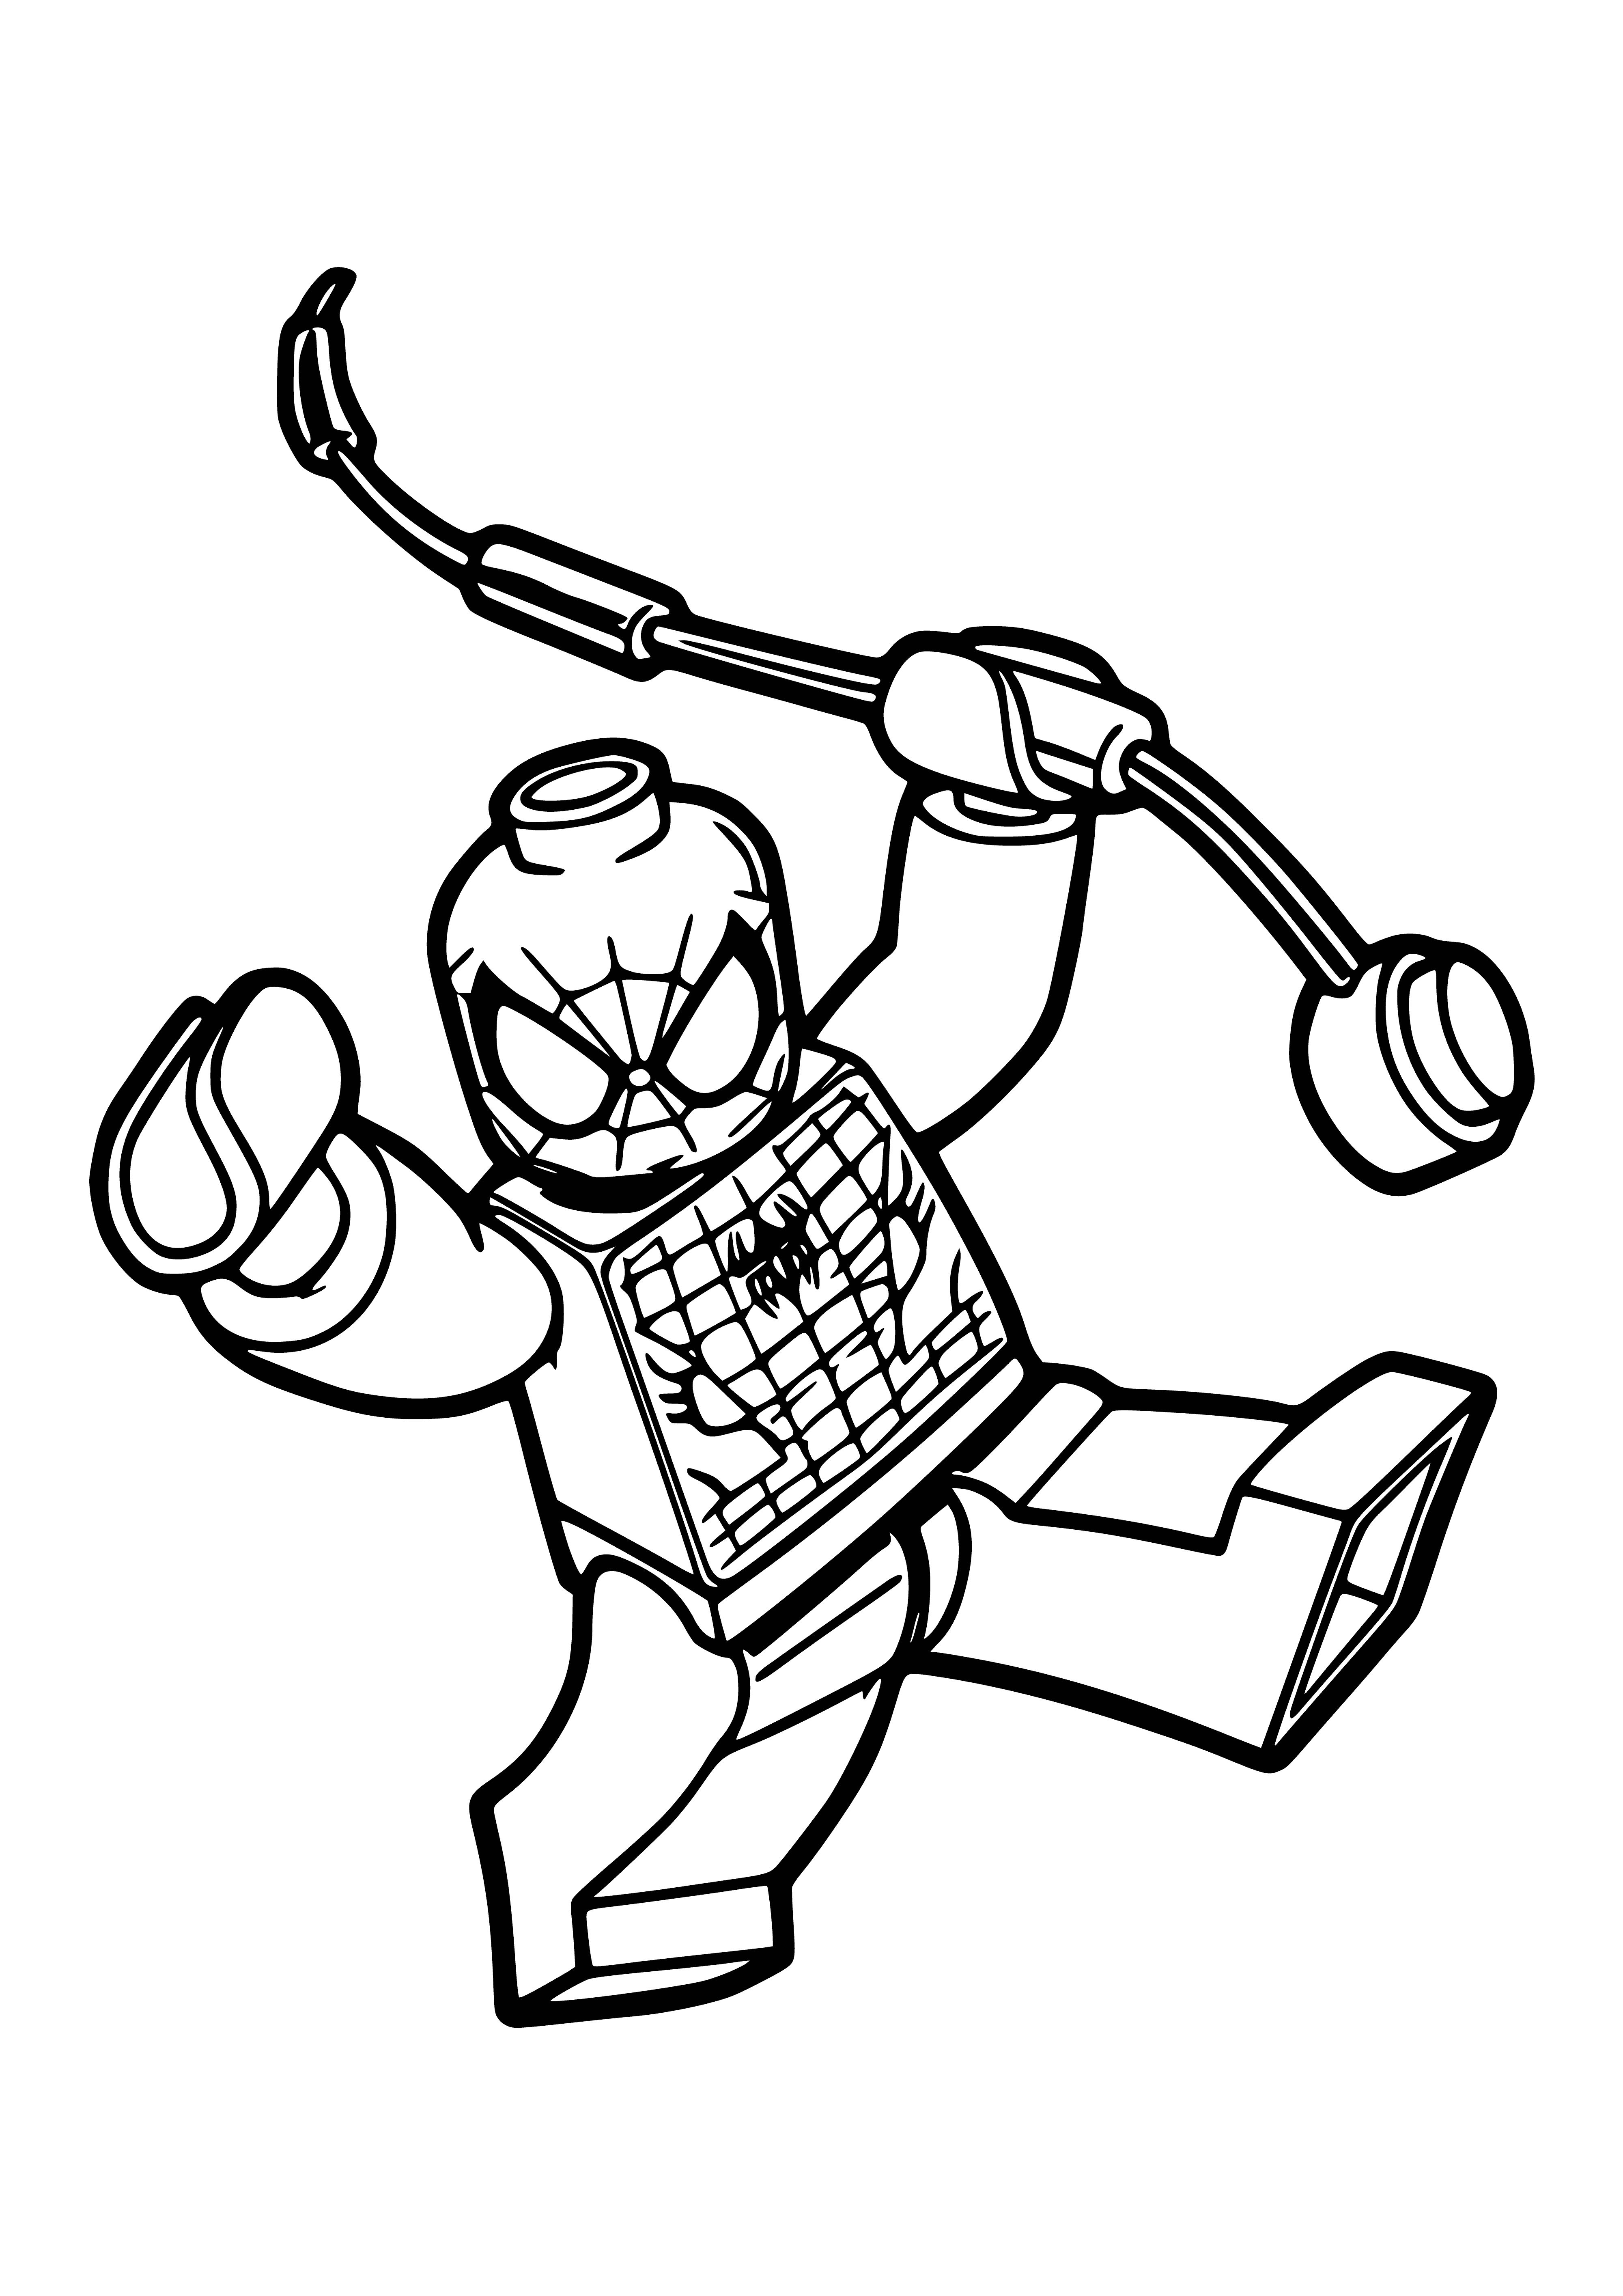 coloring page: Lego Spiderman in red and blue suit with black spider web design, black mask, and yellow brick in hand. #Lego #Spiderman